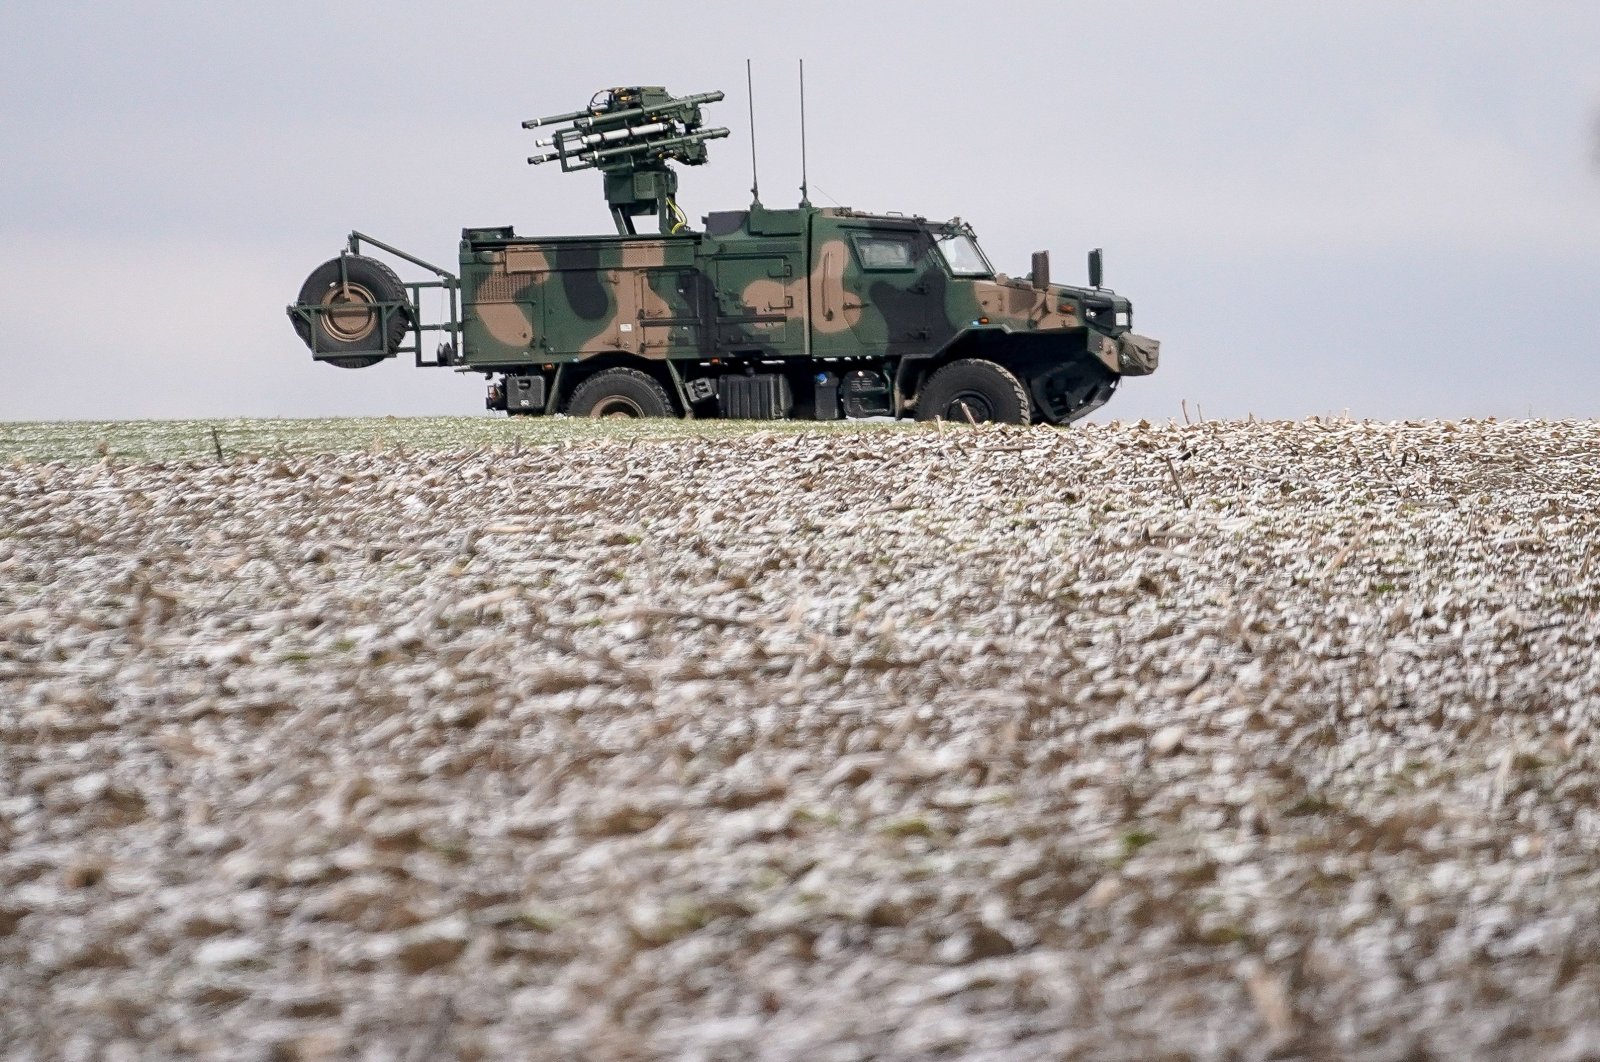 A POPRAD Close Air Defense Vehicle is seen parked in a farm field near the border of Ukraine, in southeast Poland, Feb. 28, 2022. (Reuters Photo)